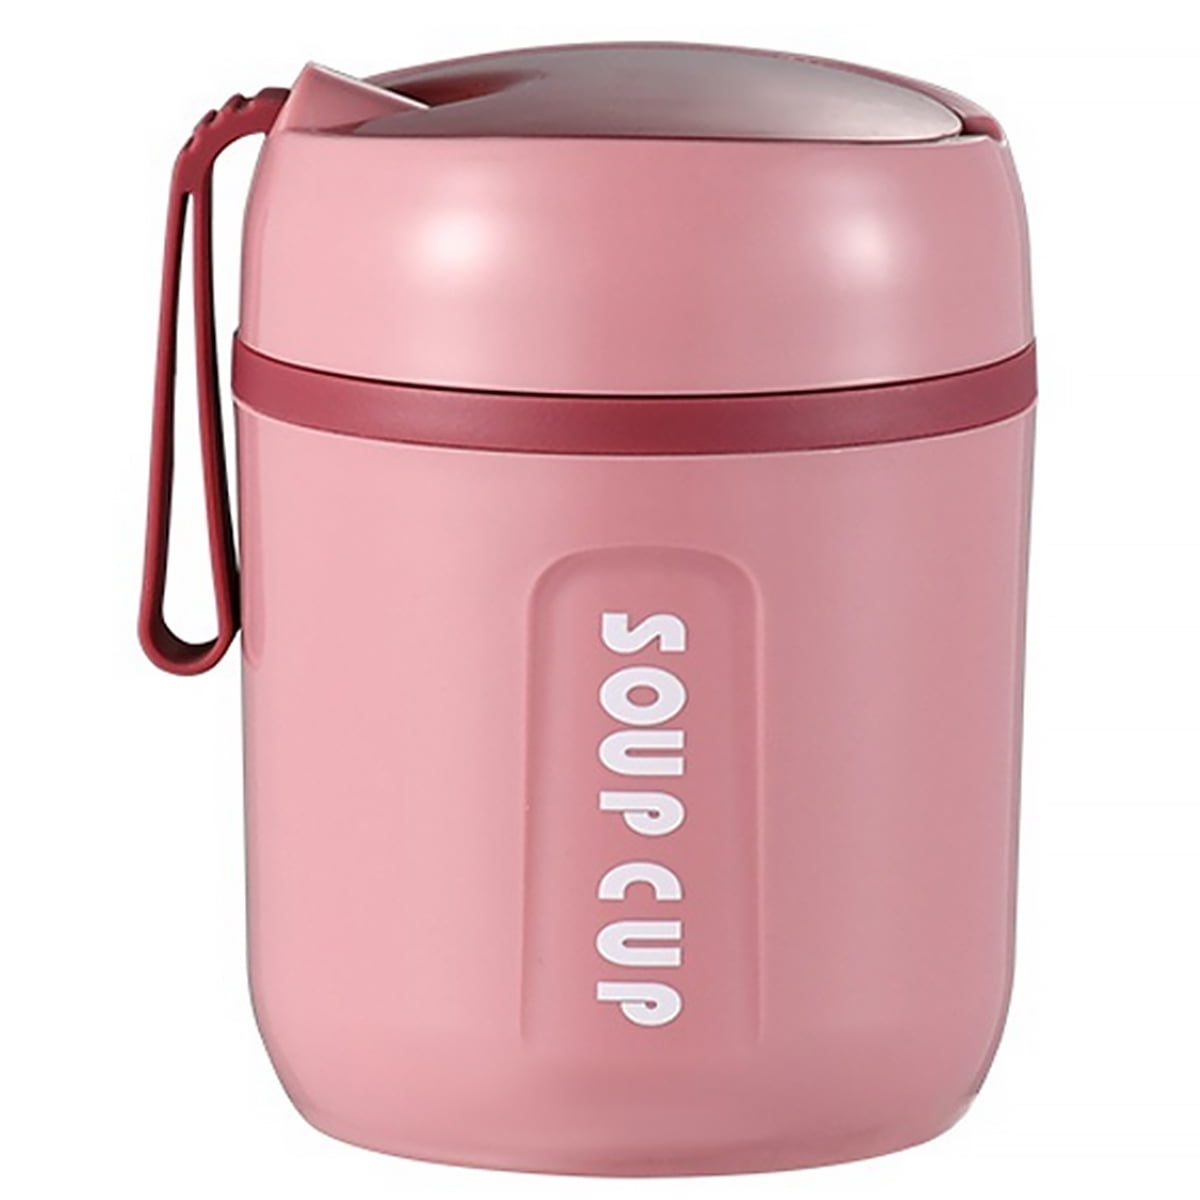 Jikolililili Insulated Container for Hot Food - Wide Mouth Hot